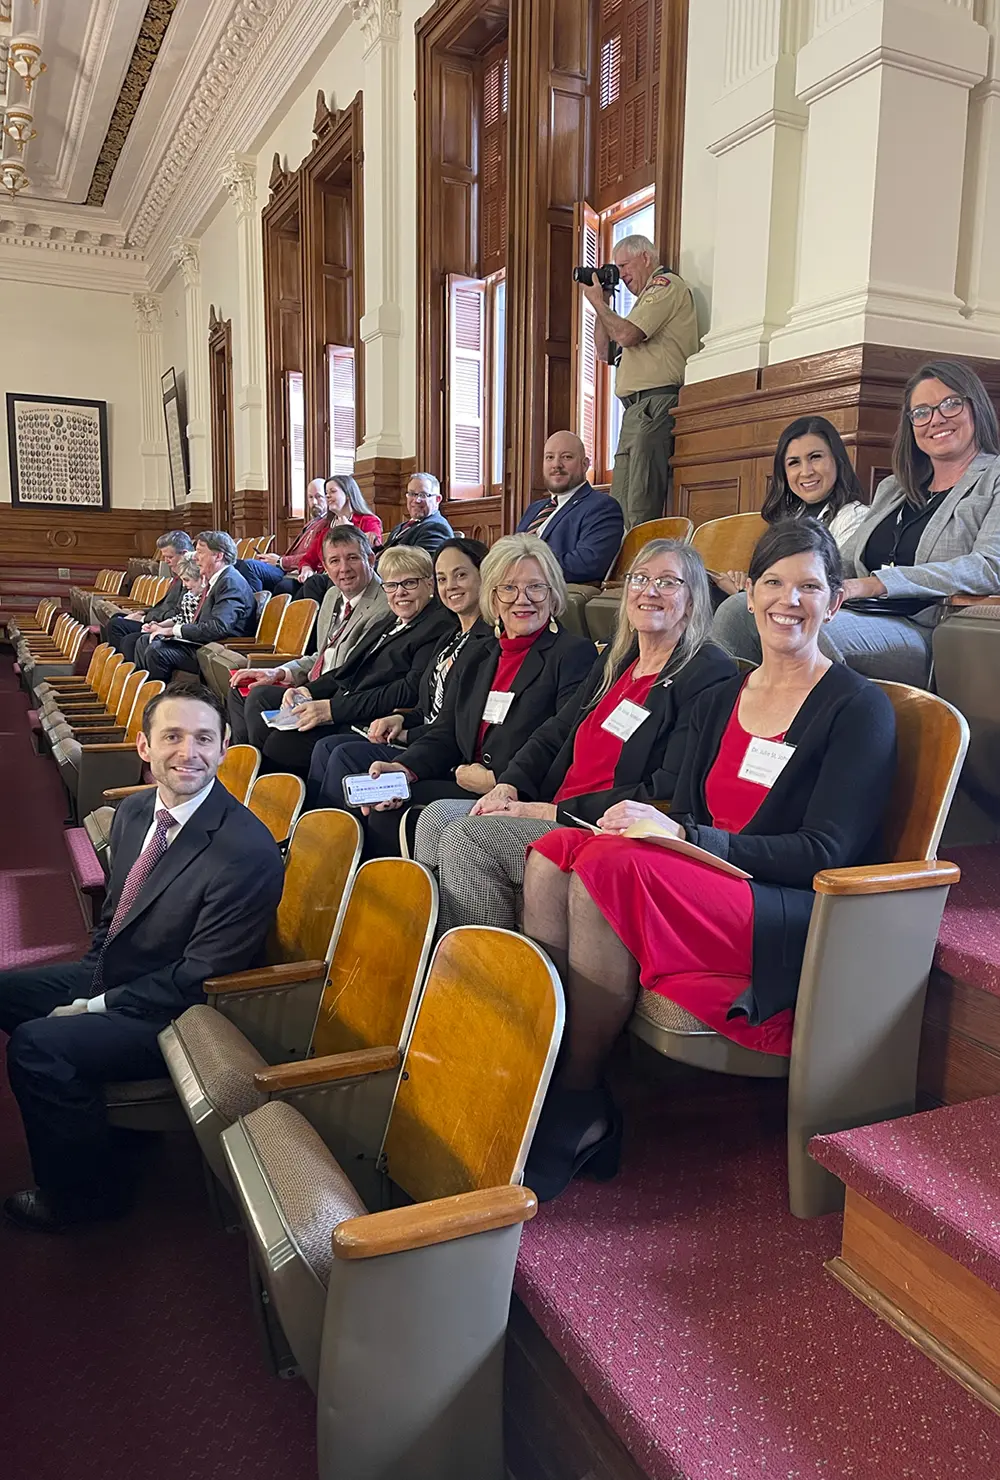 TTUHSC alumni, donors, faculty and staff in capitol chambers